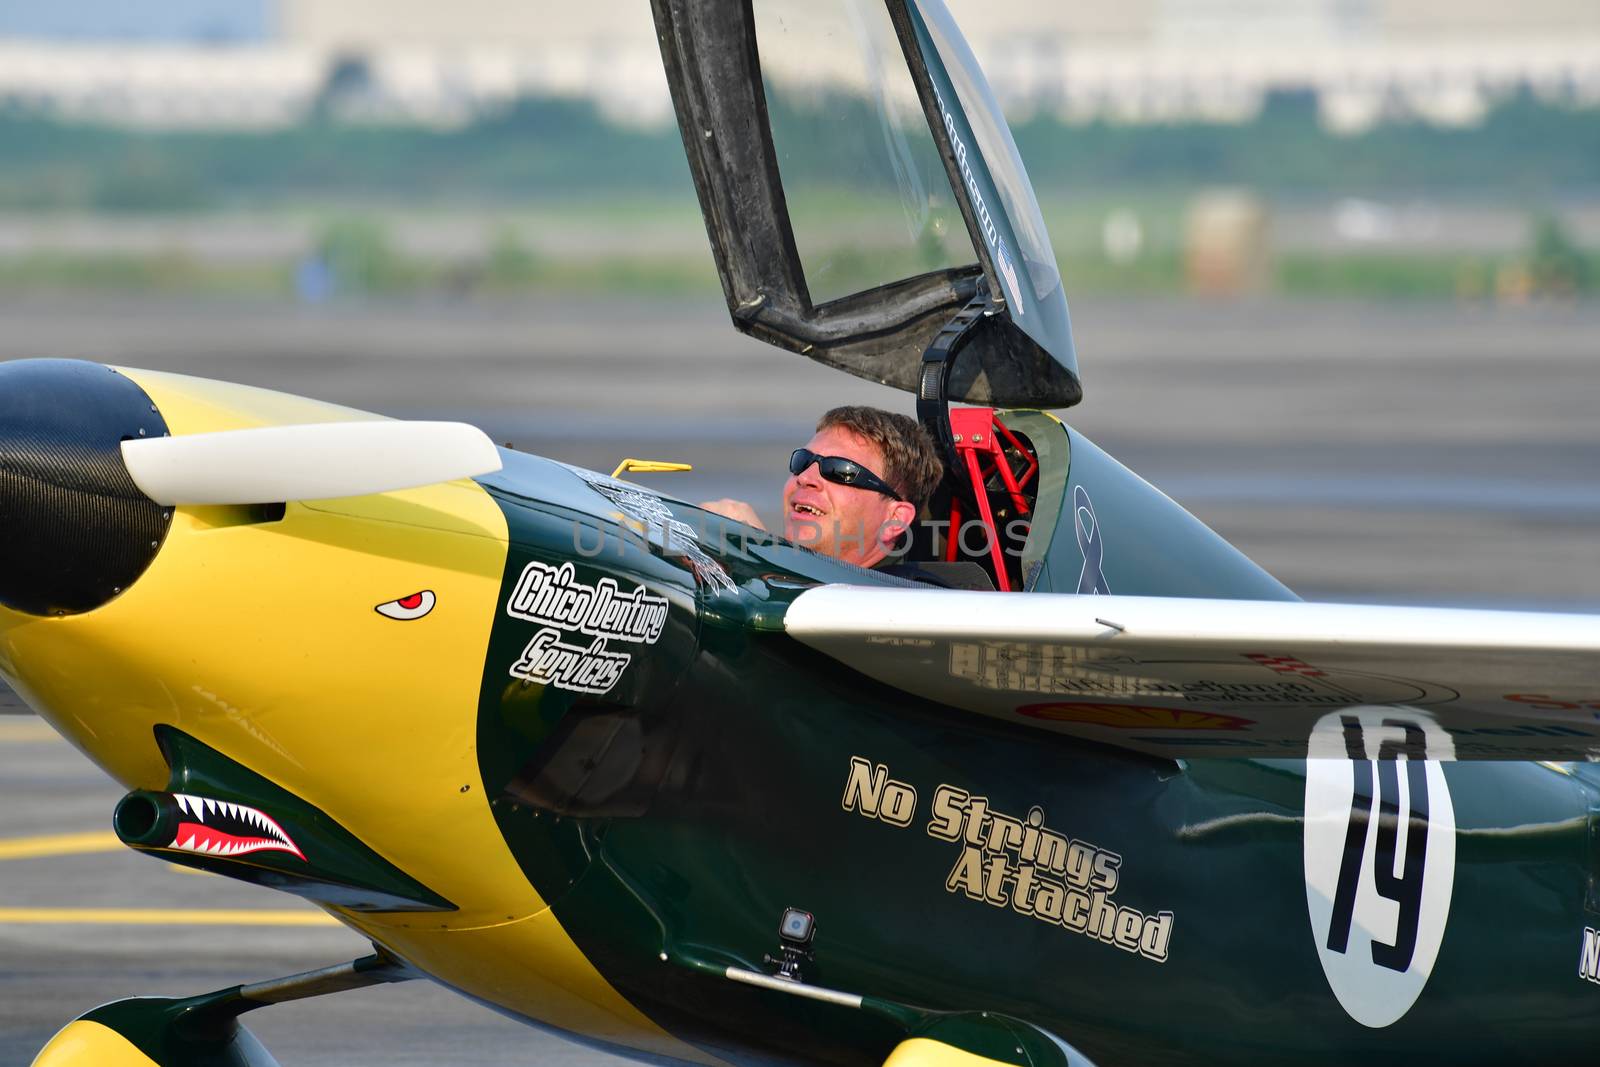 CHONBURI - NOVEMBER 20 : Justin Phillipson pilot of USA with Shoestring aircraft in Air Race 1 Thailand at U-Tapao International Airport on November 20, 2016 in Chonburi, Thailand.